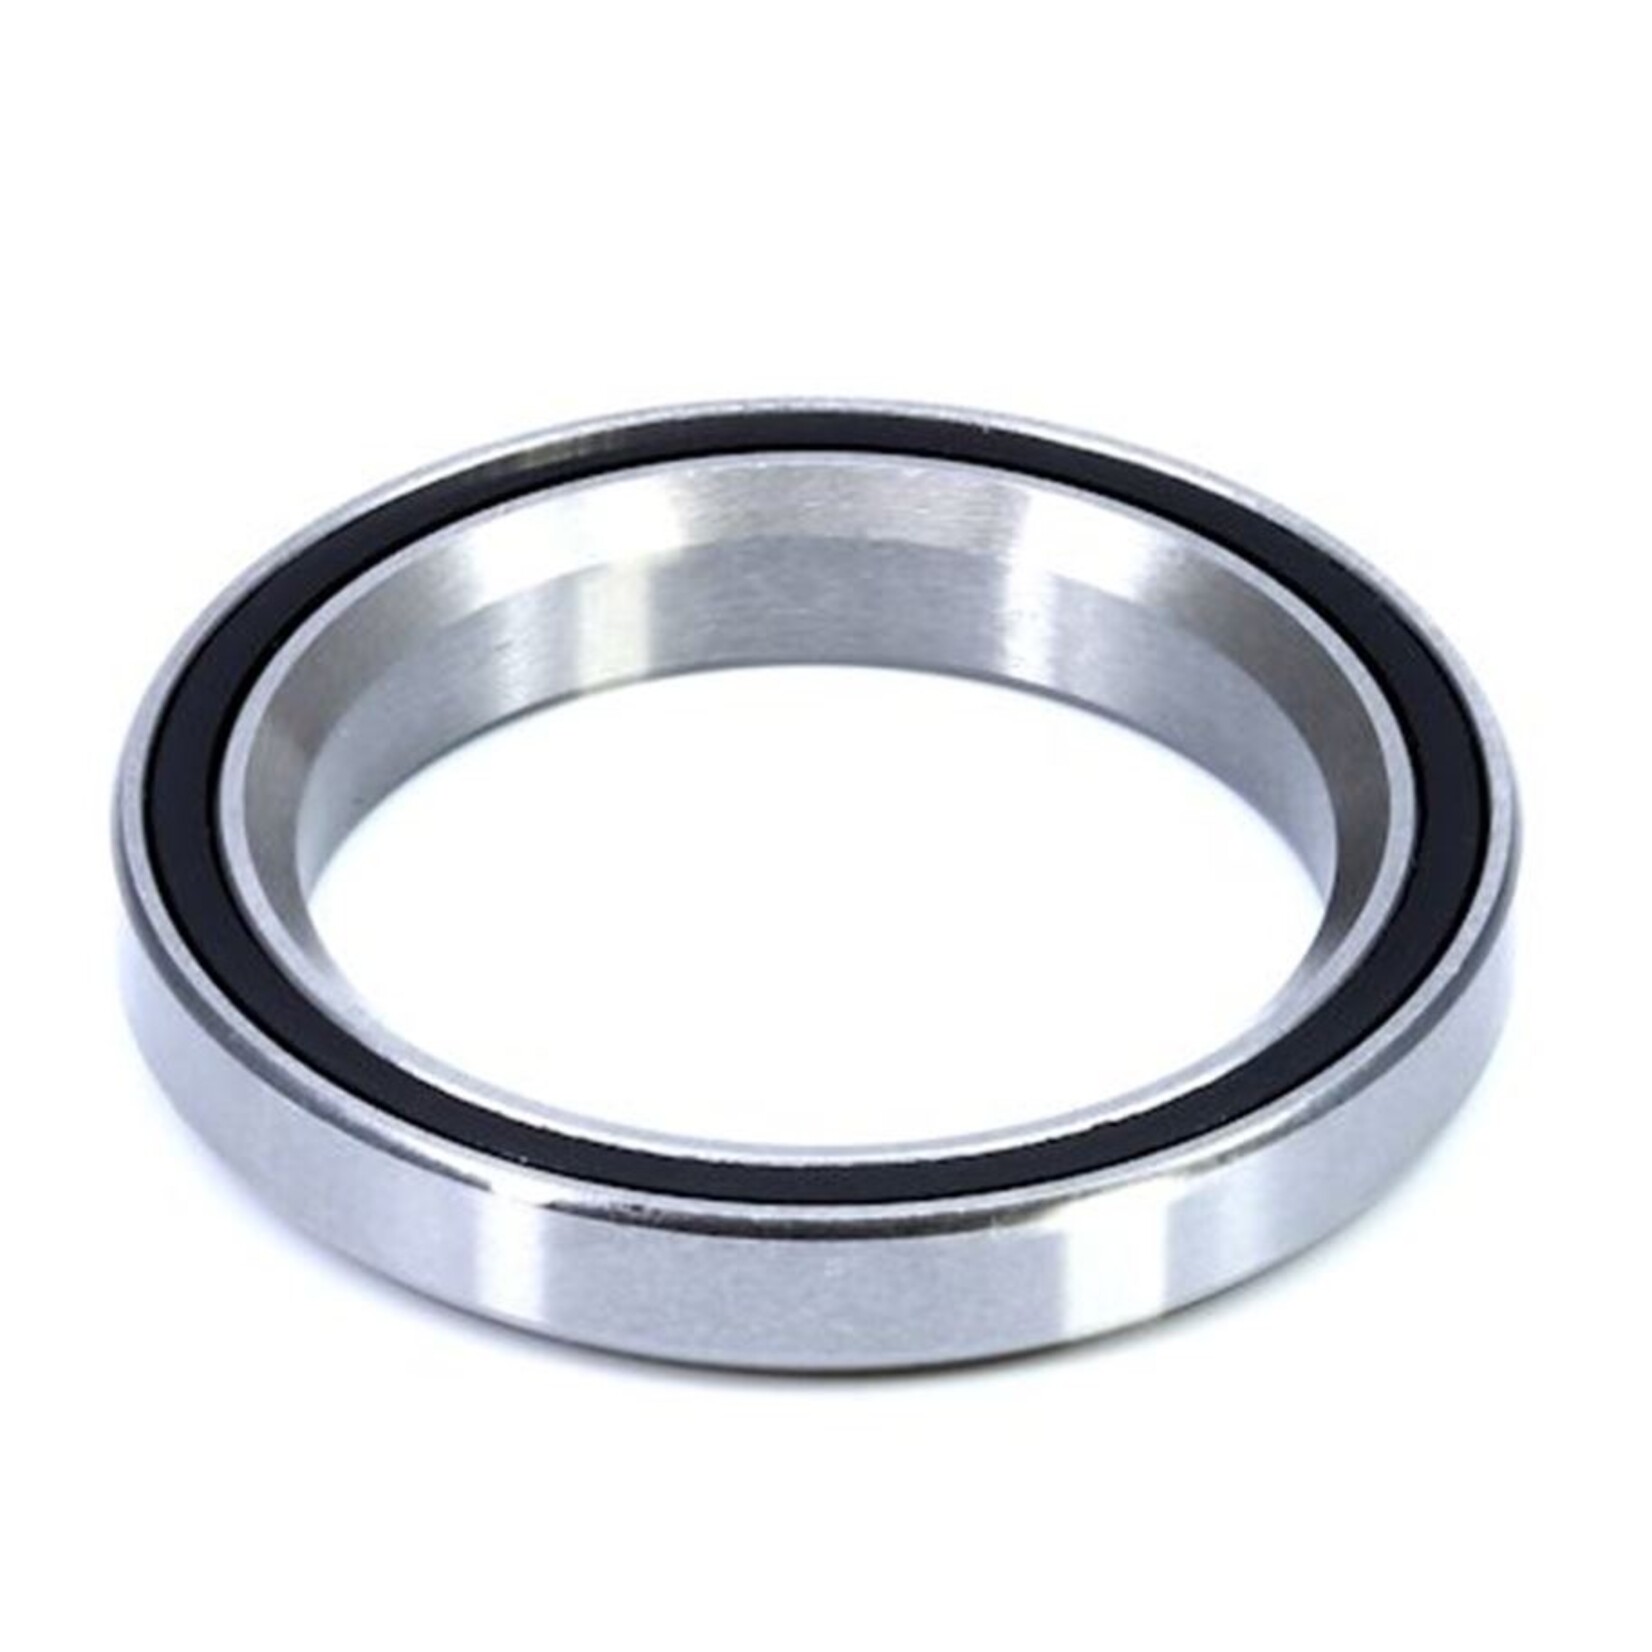 Kinetic Bearings ACB495H6.5 Headset Bearing to fit Specialized Venge Lower Bearing 2016 Onwards